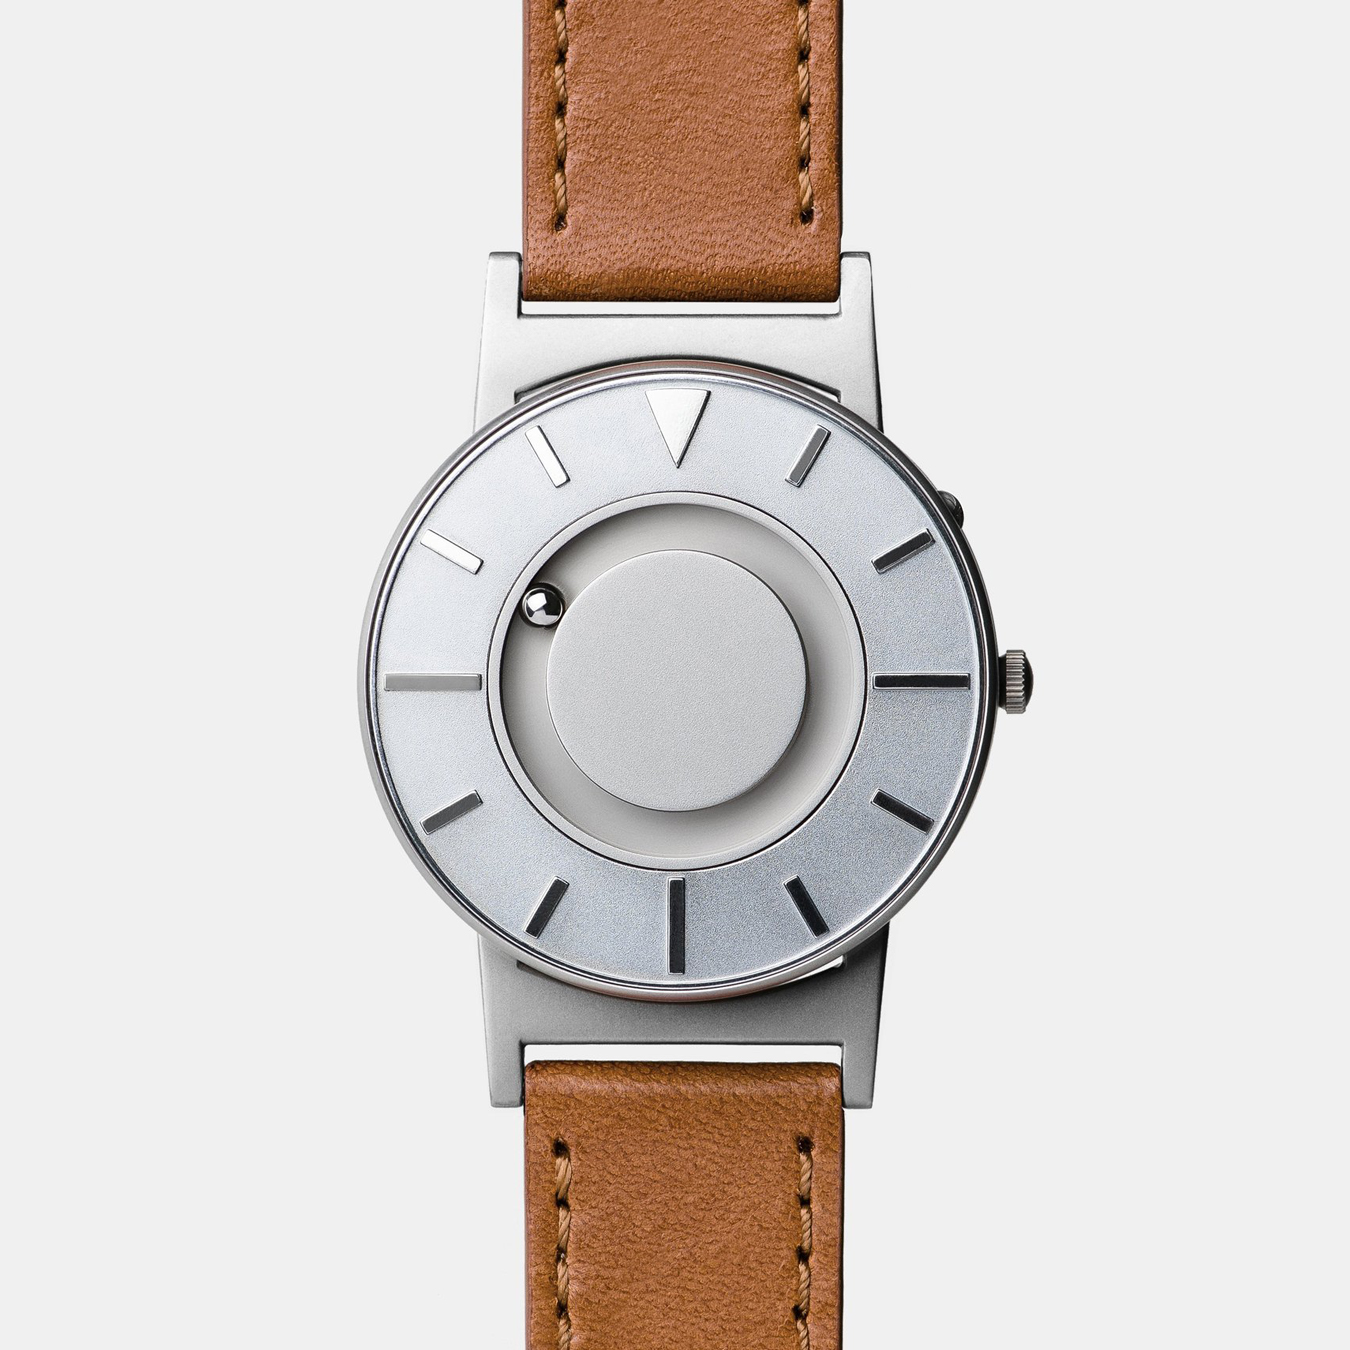 An image of the Bradley Timepiece, a watch invented for blind users. It uses magnetic ball bearings instead of hands, so when the user feels the time the movement is not able to be accidentally moved out of place.